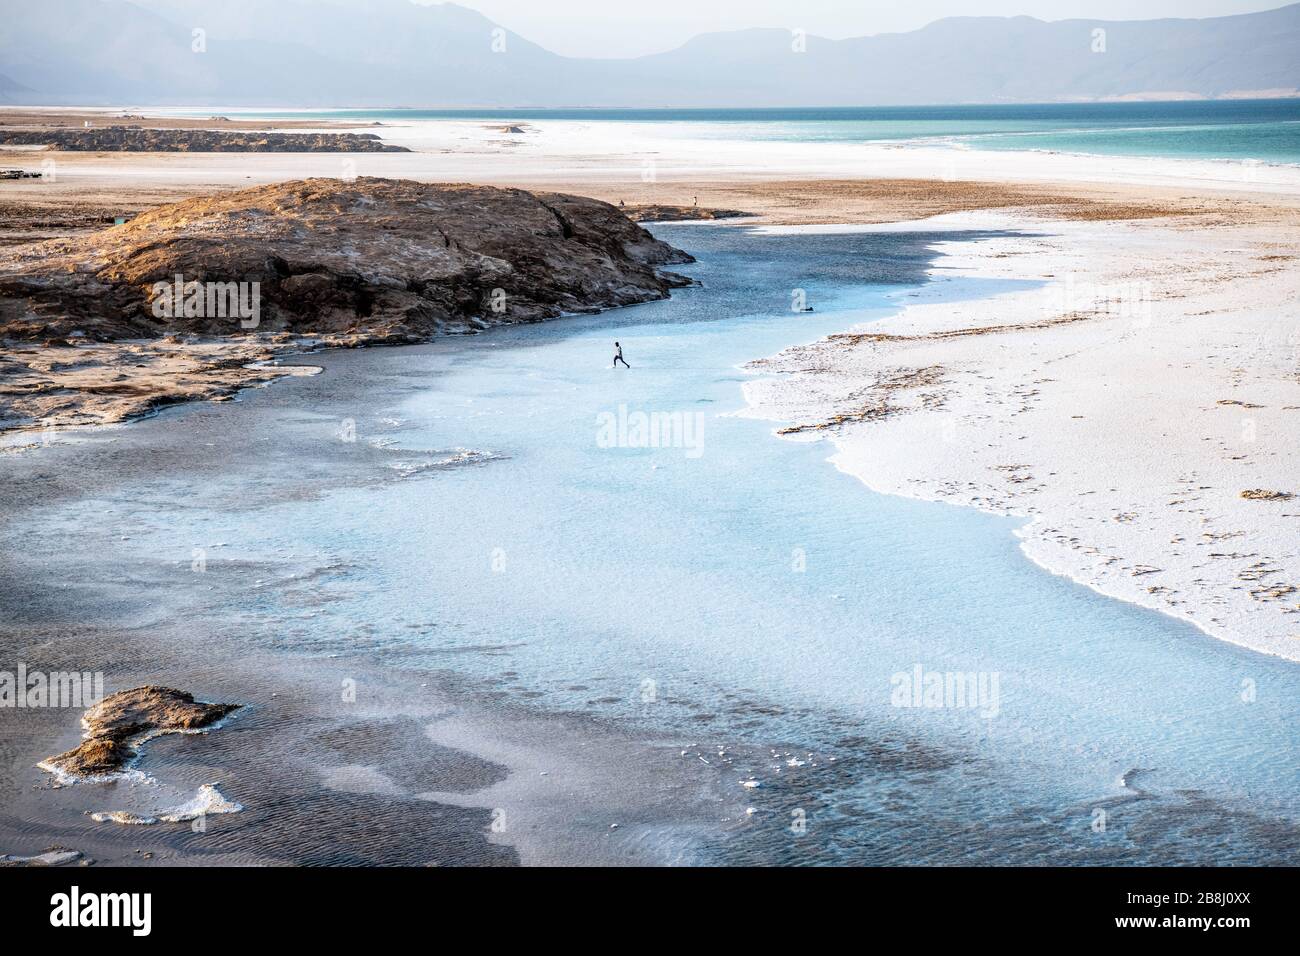 Africa, Djibouti, Lake Assal. Landscape view of lake Assal with people harvesting salt and a man crossing the water pound Stock Photo